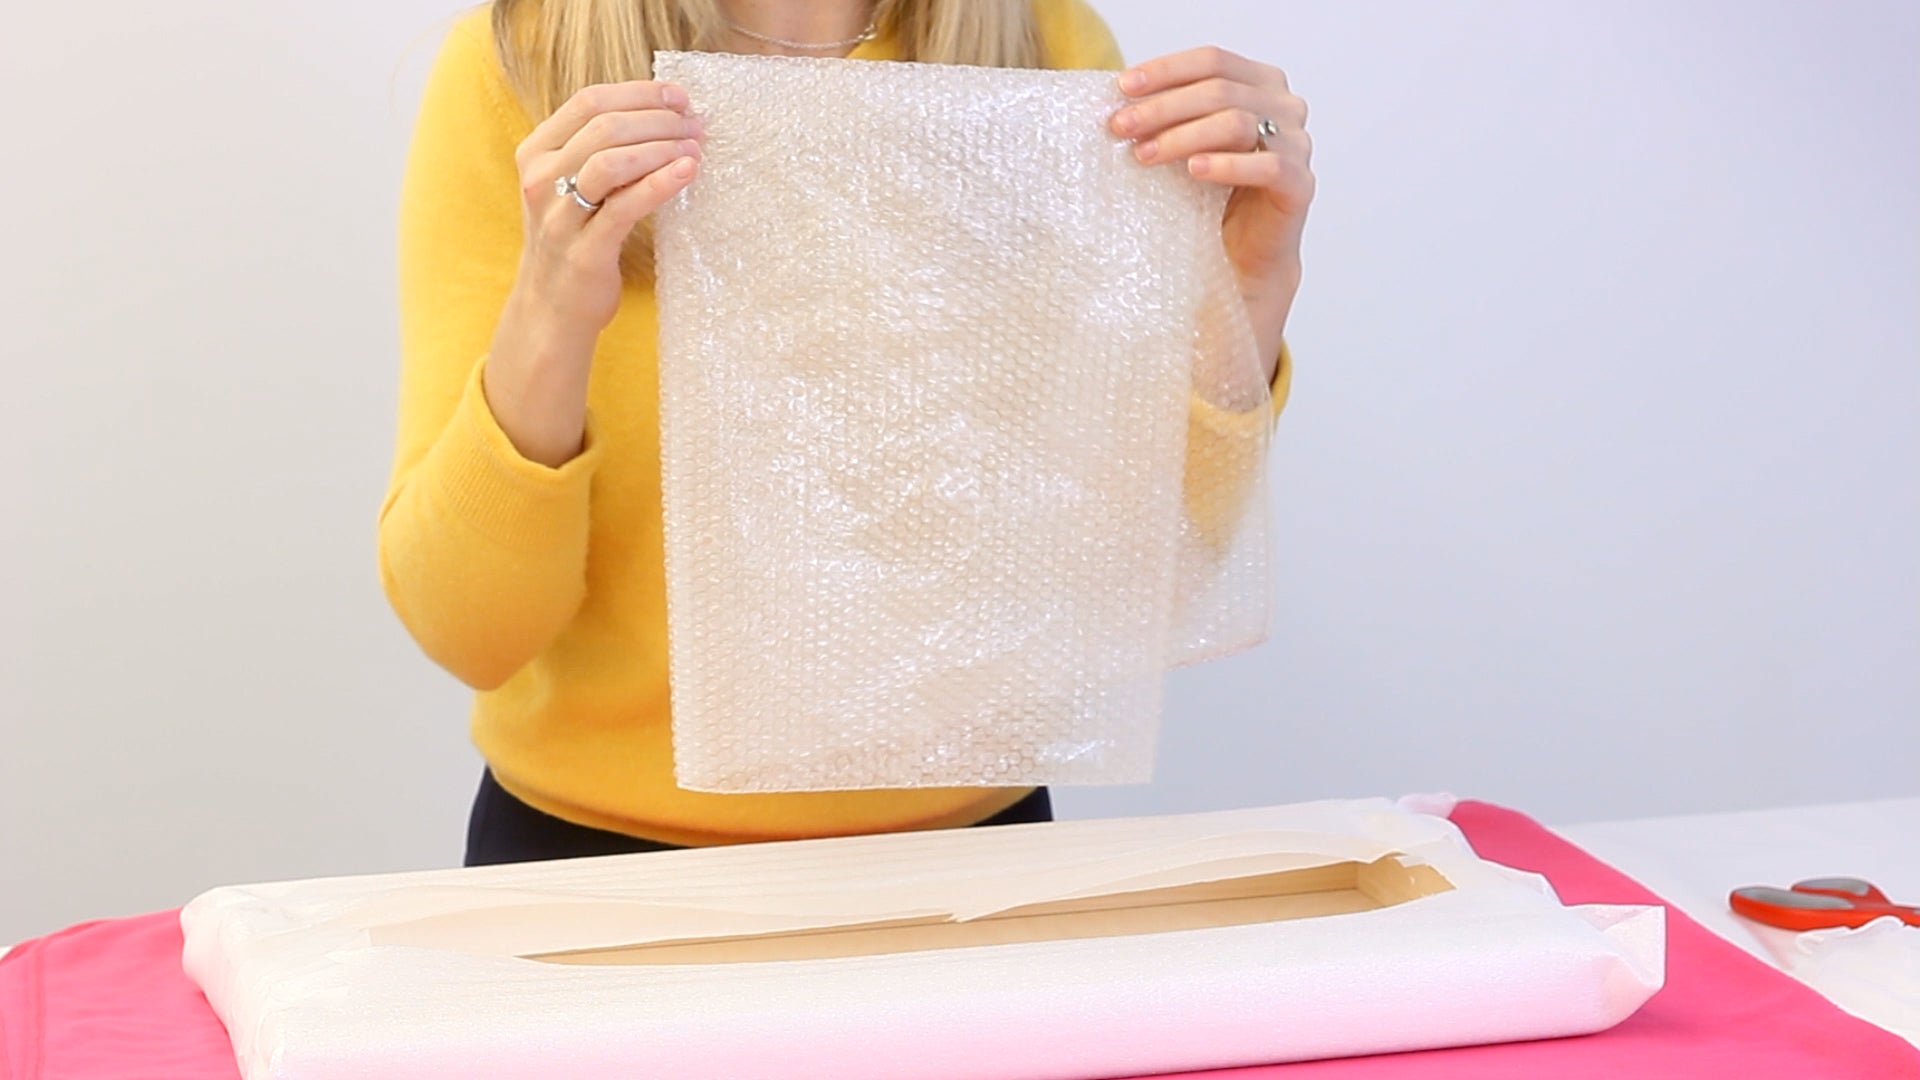 Best Way To Pack Resin Art - Bubblewrap especially is a big no-no